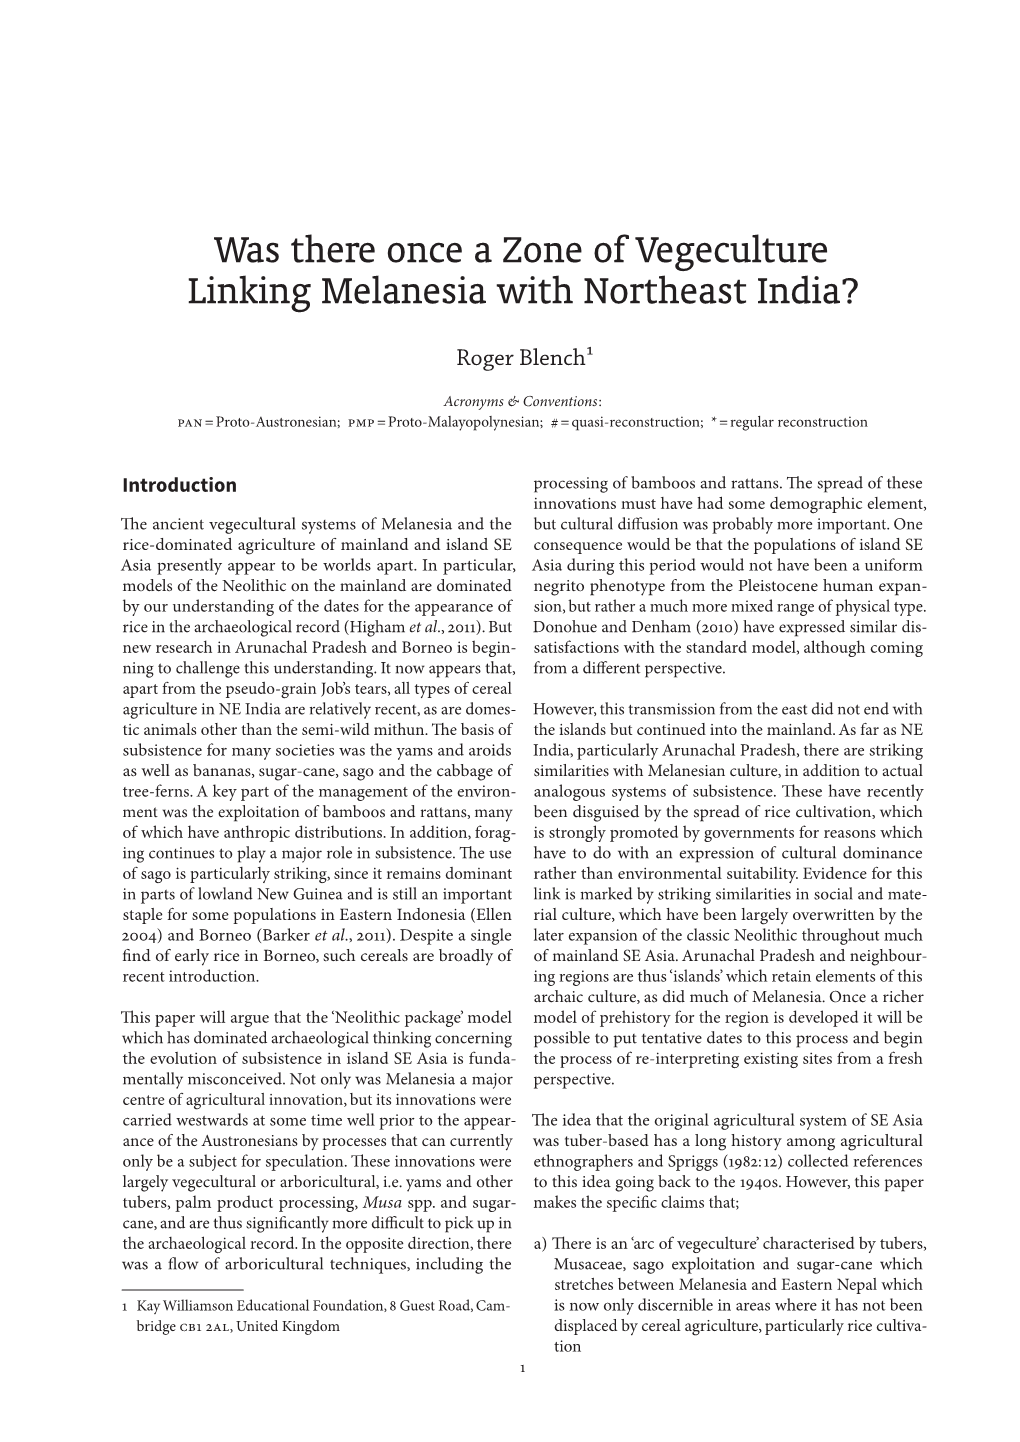 Was There Once a Zone of Vegeculture Linking Melanesia with Northeast India?